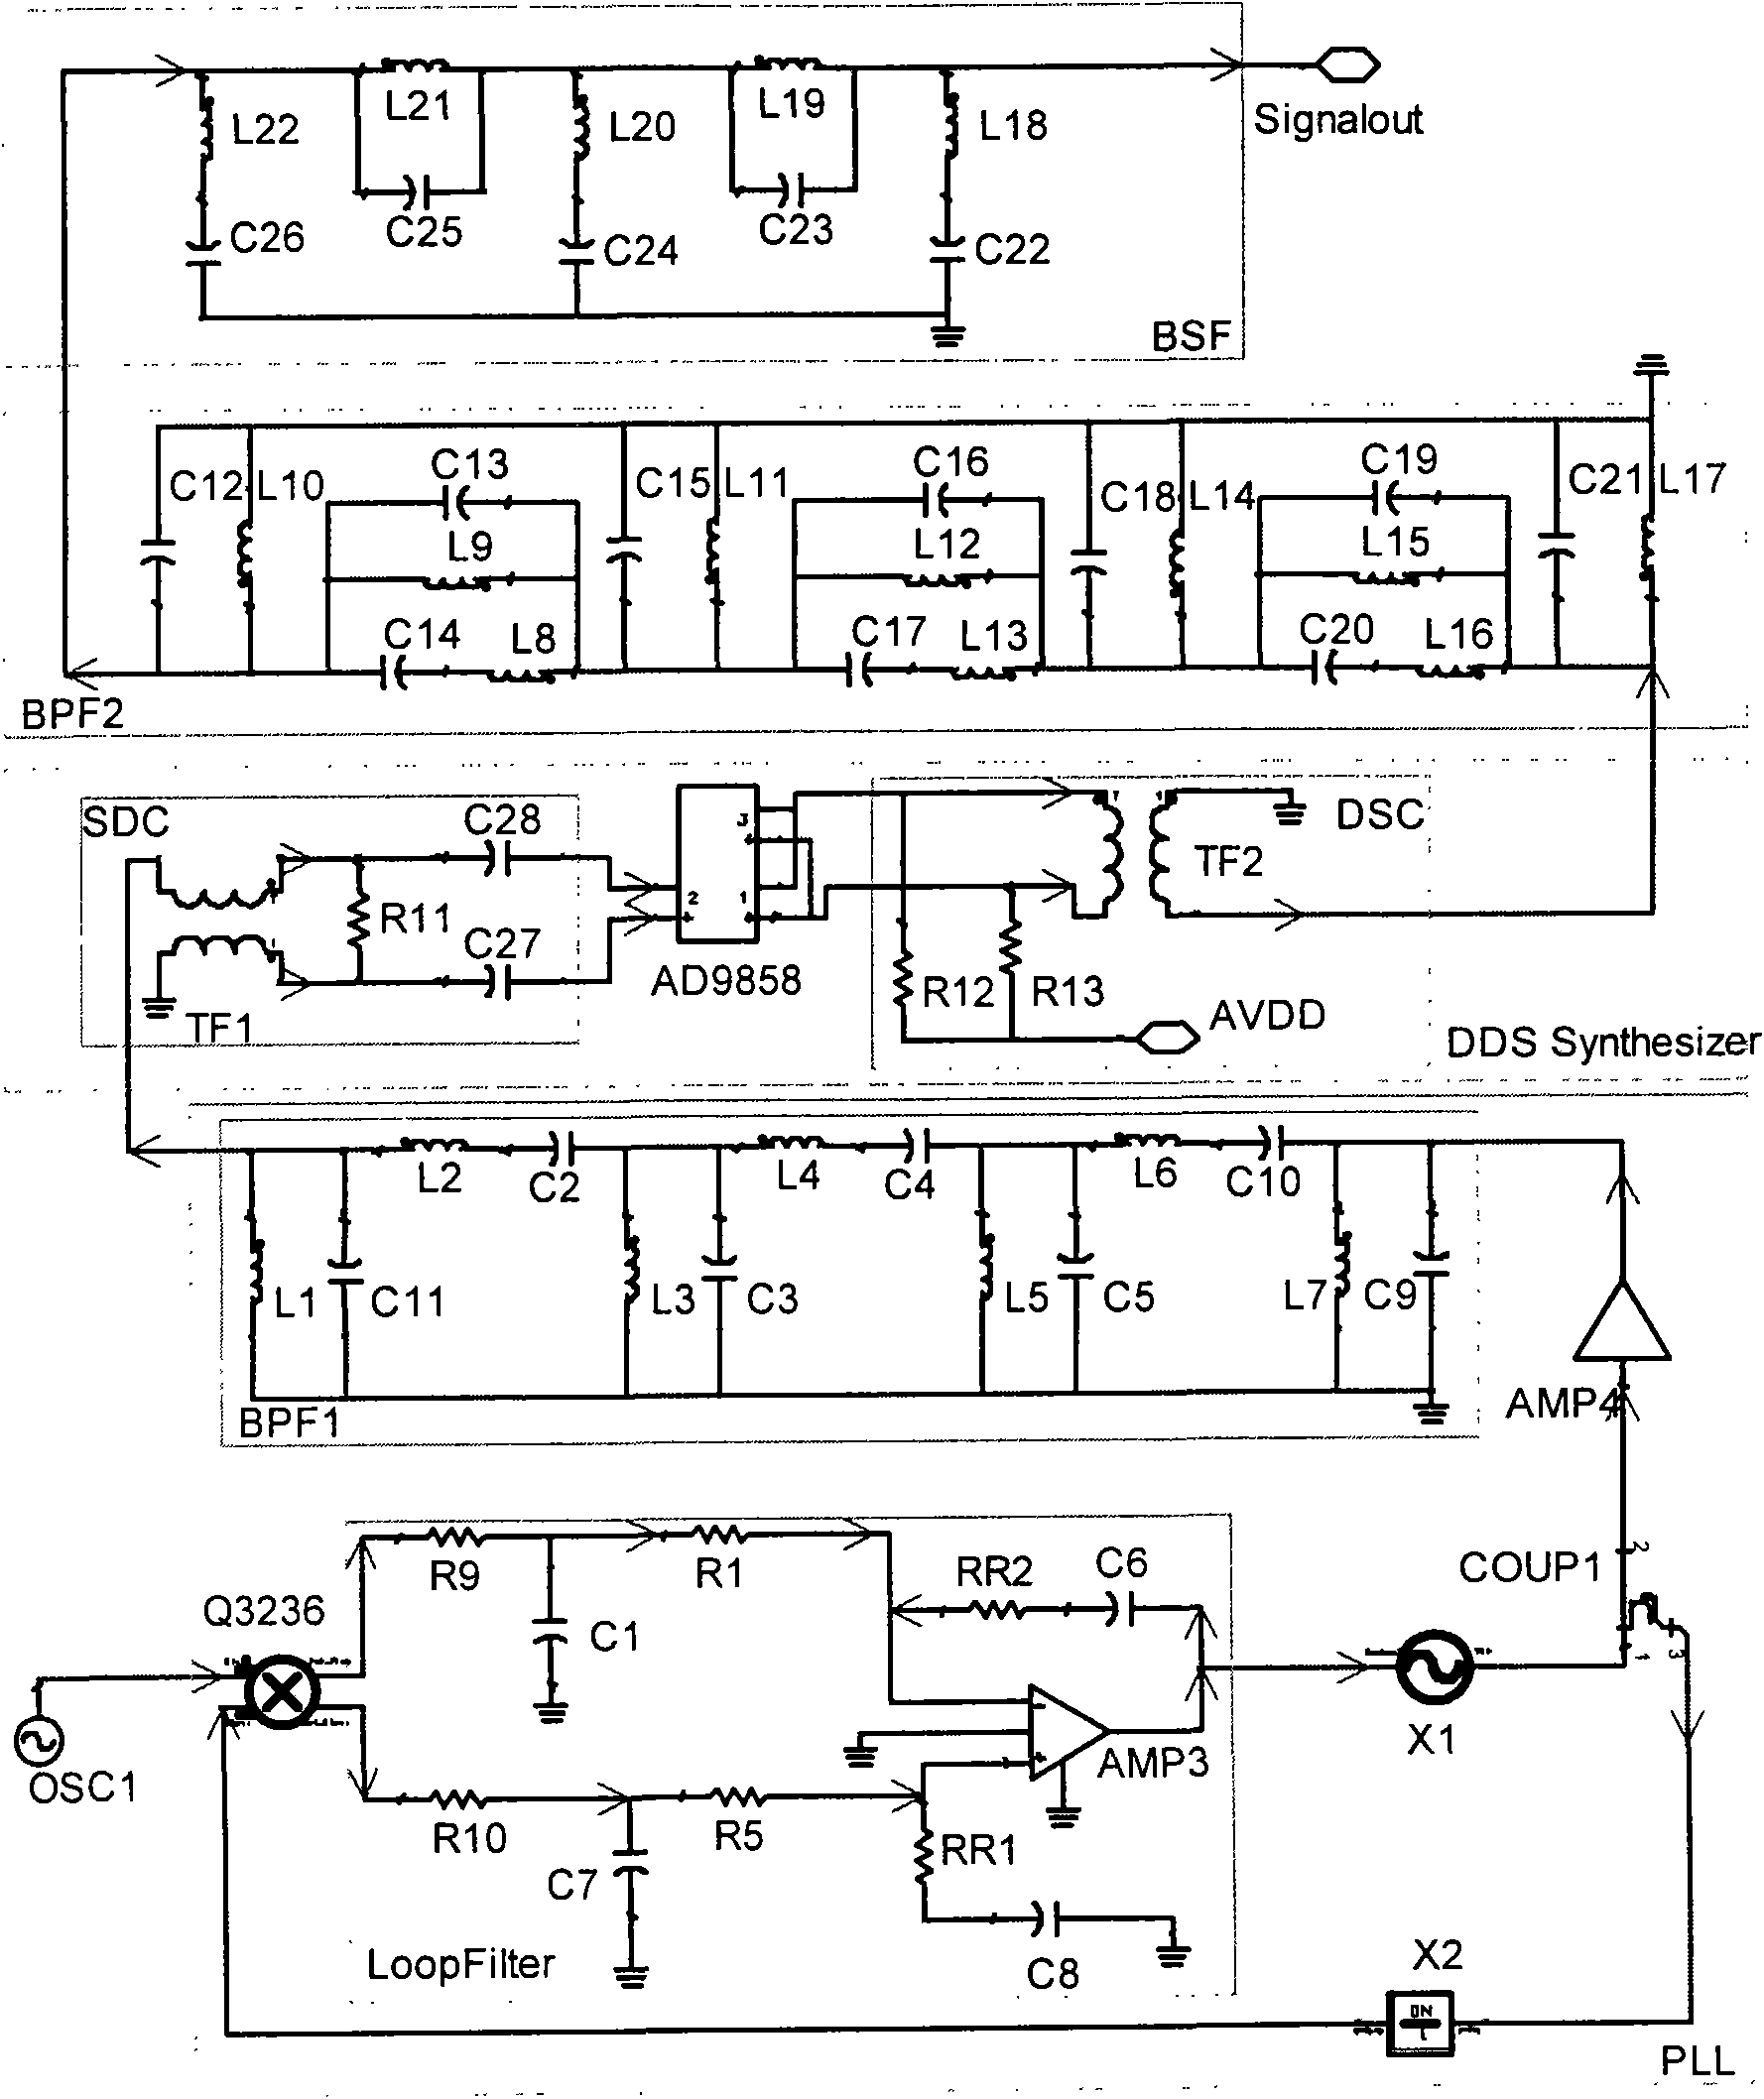 Frequency synthesis system for enhancing spectrum purity of direct digital frequency synthesizer